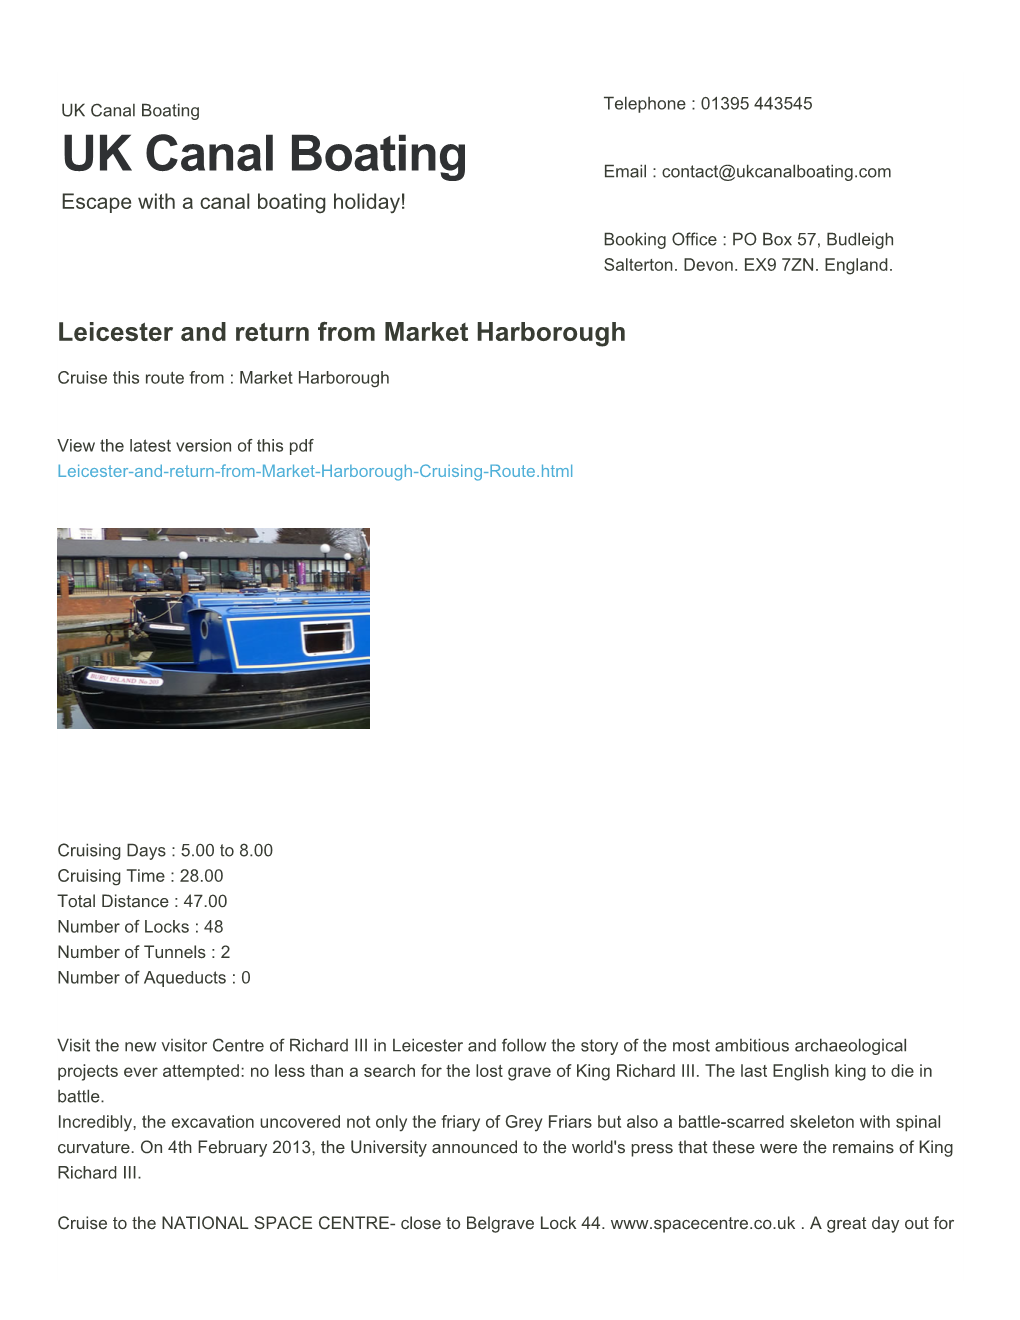 Leicester and Return from Market Harborough | UK Canal Boating